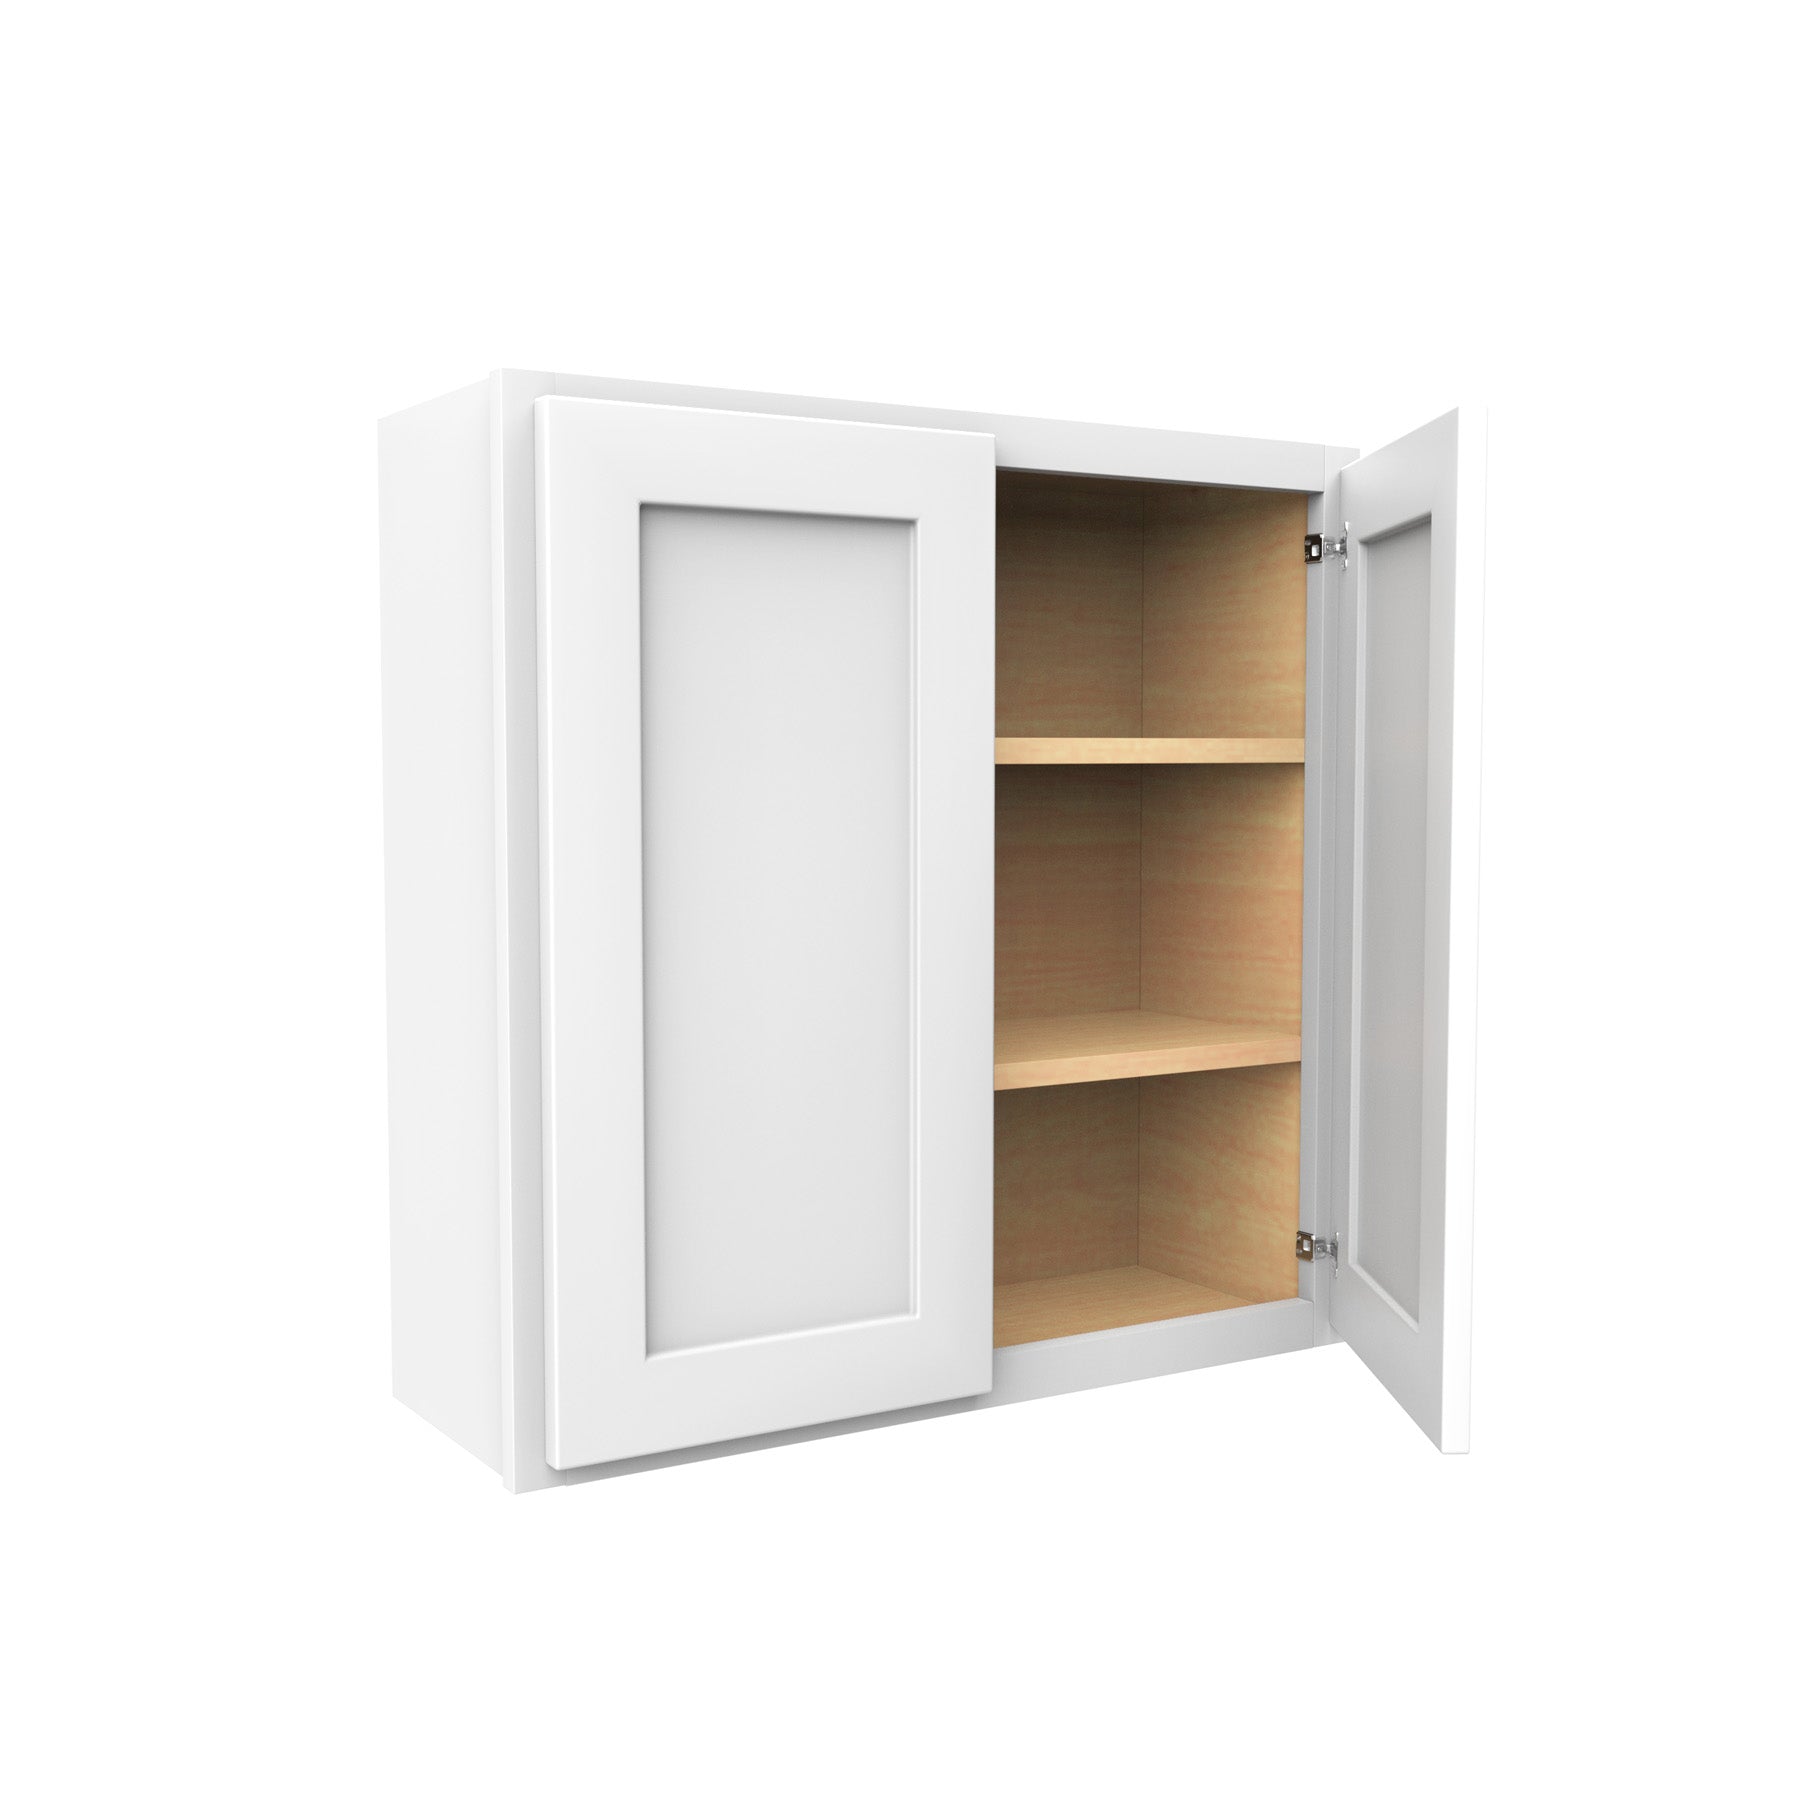 30 Inch High Double Door Wall Cabinet - Luxor White Shaker - Ready To Assemble, 30"W x 30"H x 12"D